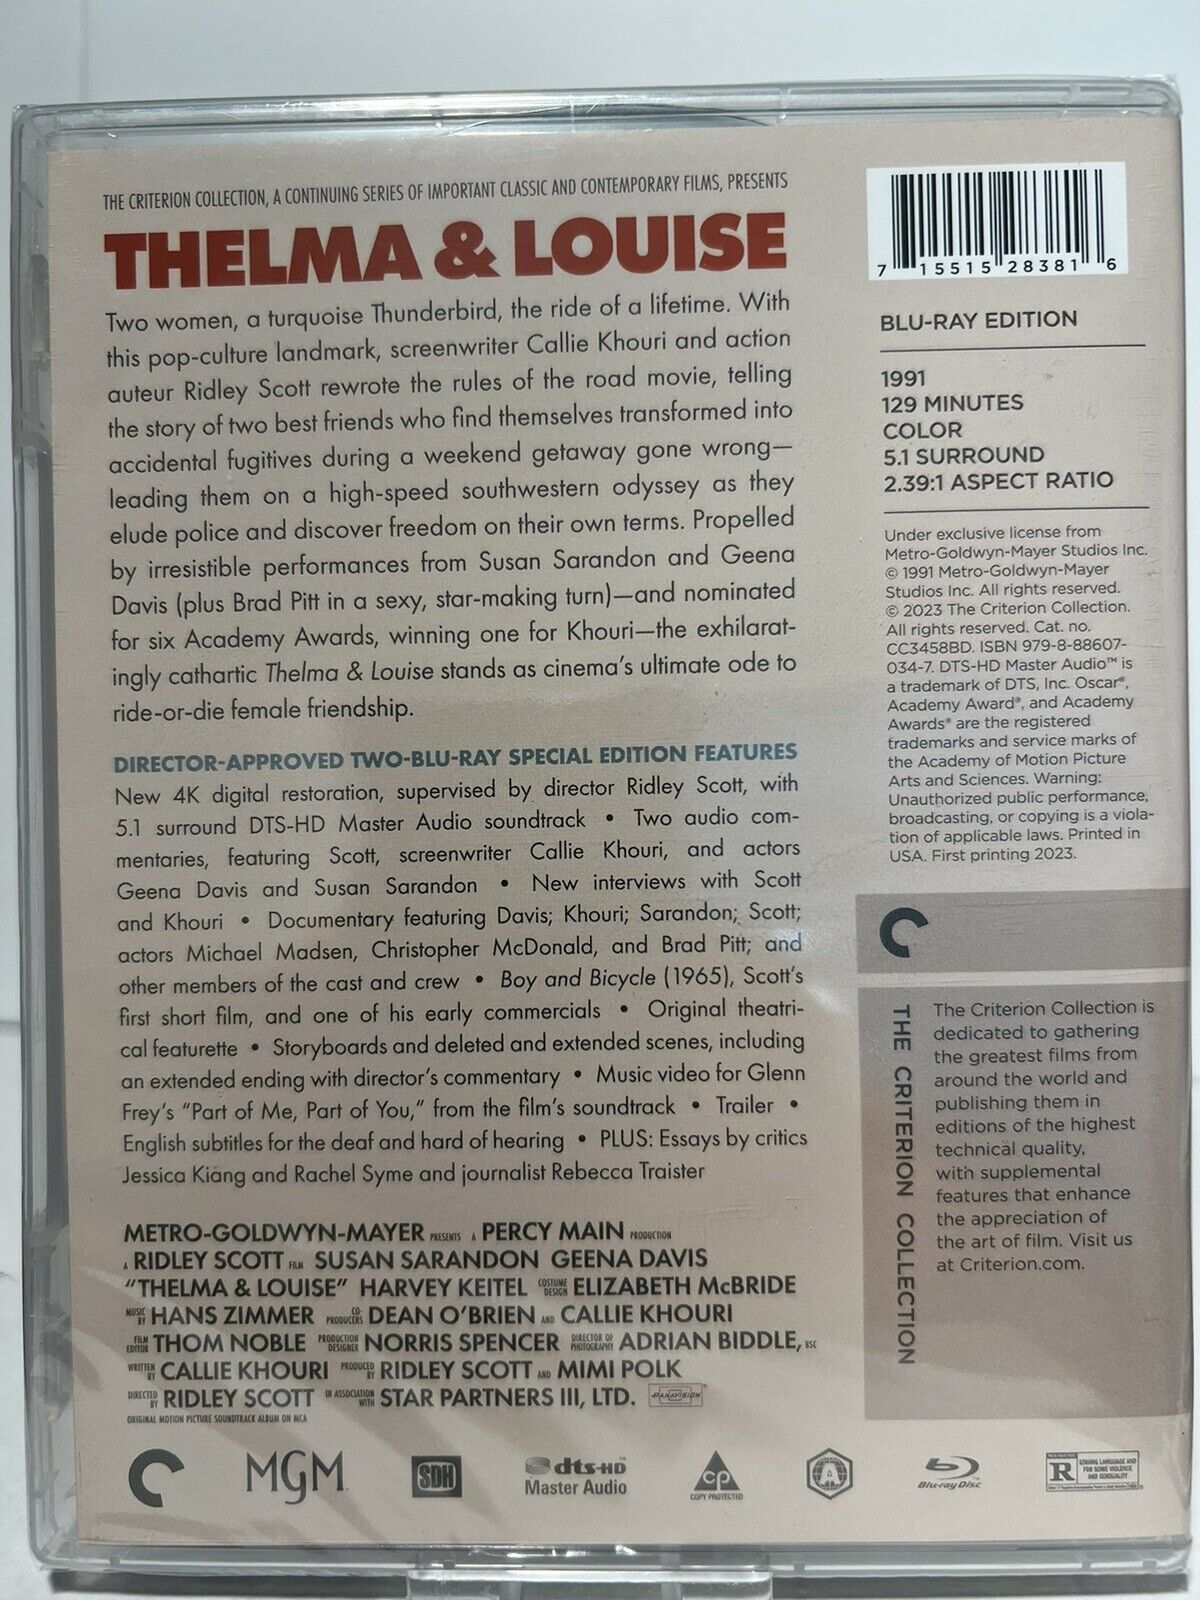 Thelma & Louise Drives Into The Criterion Collection - The Knockturnal